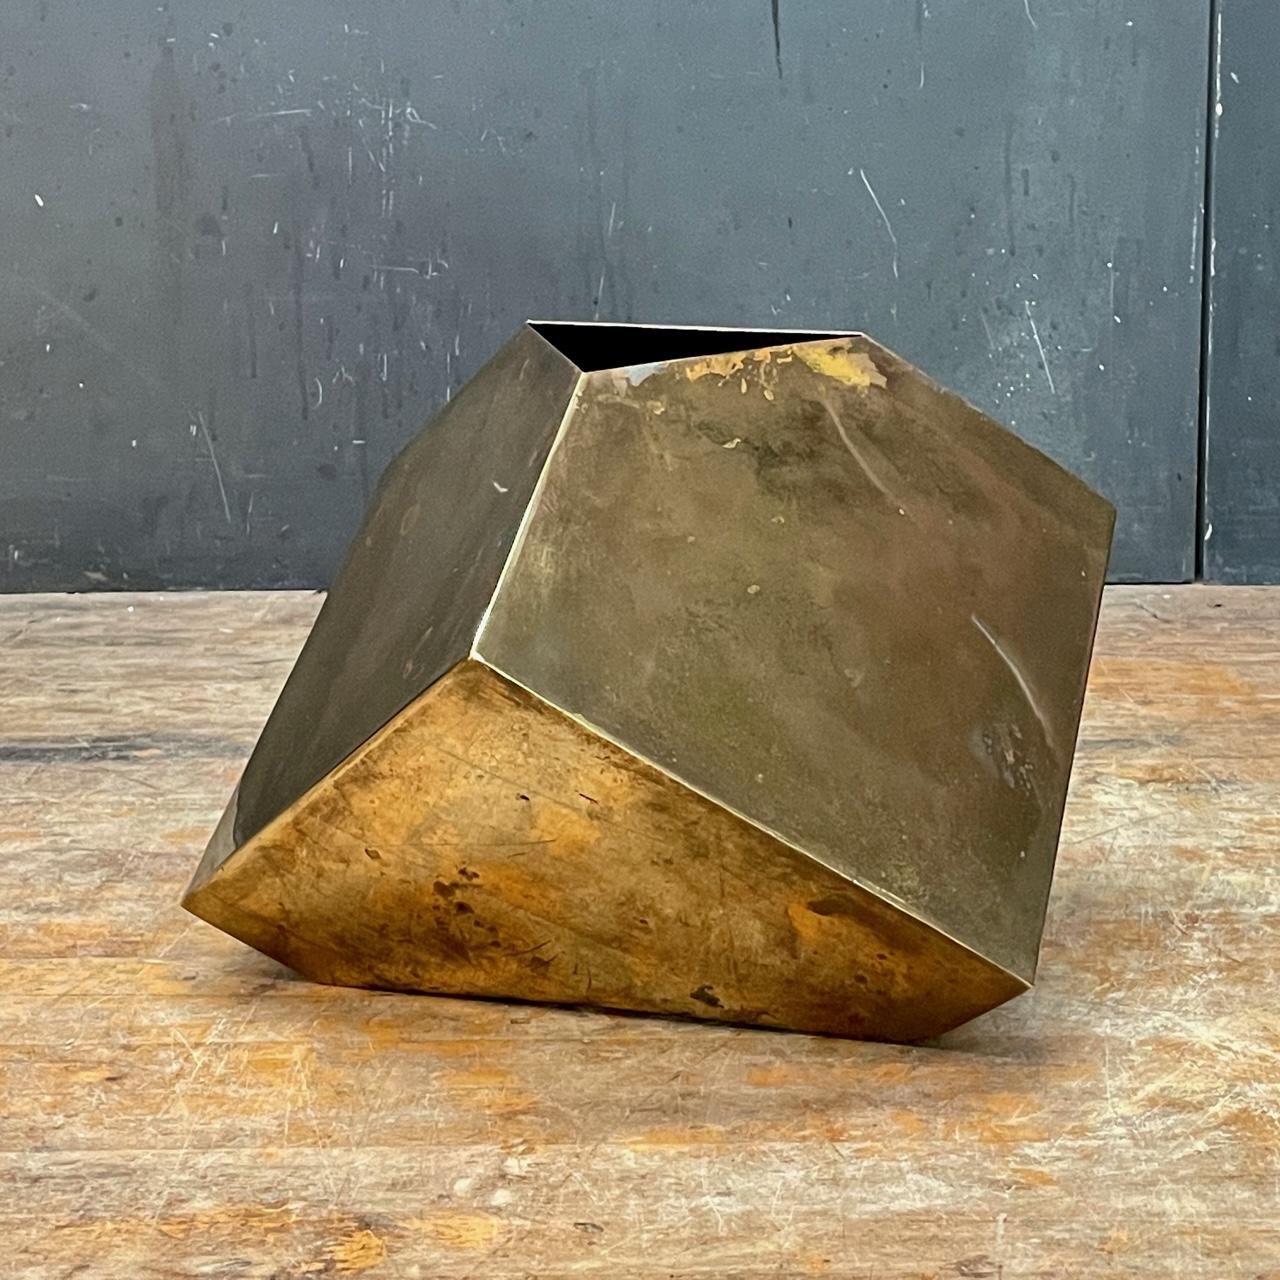 Late Mid-Century or Post Modern Era design, time-worn tarnished patinated warm brass, interesting geometric vase form. A nice rare large size. Showing some wear; a small dent to one fold, and an unfinished seam at mouth of vase. Nothing is loose,